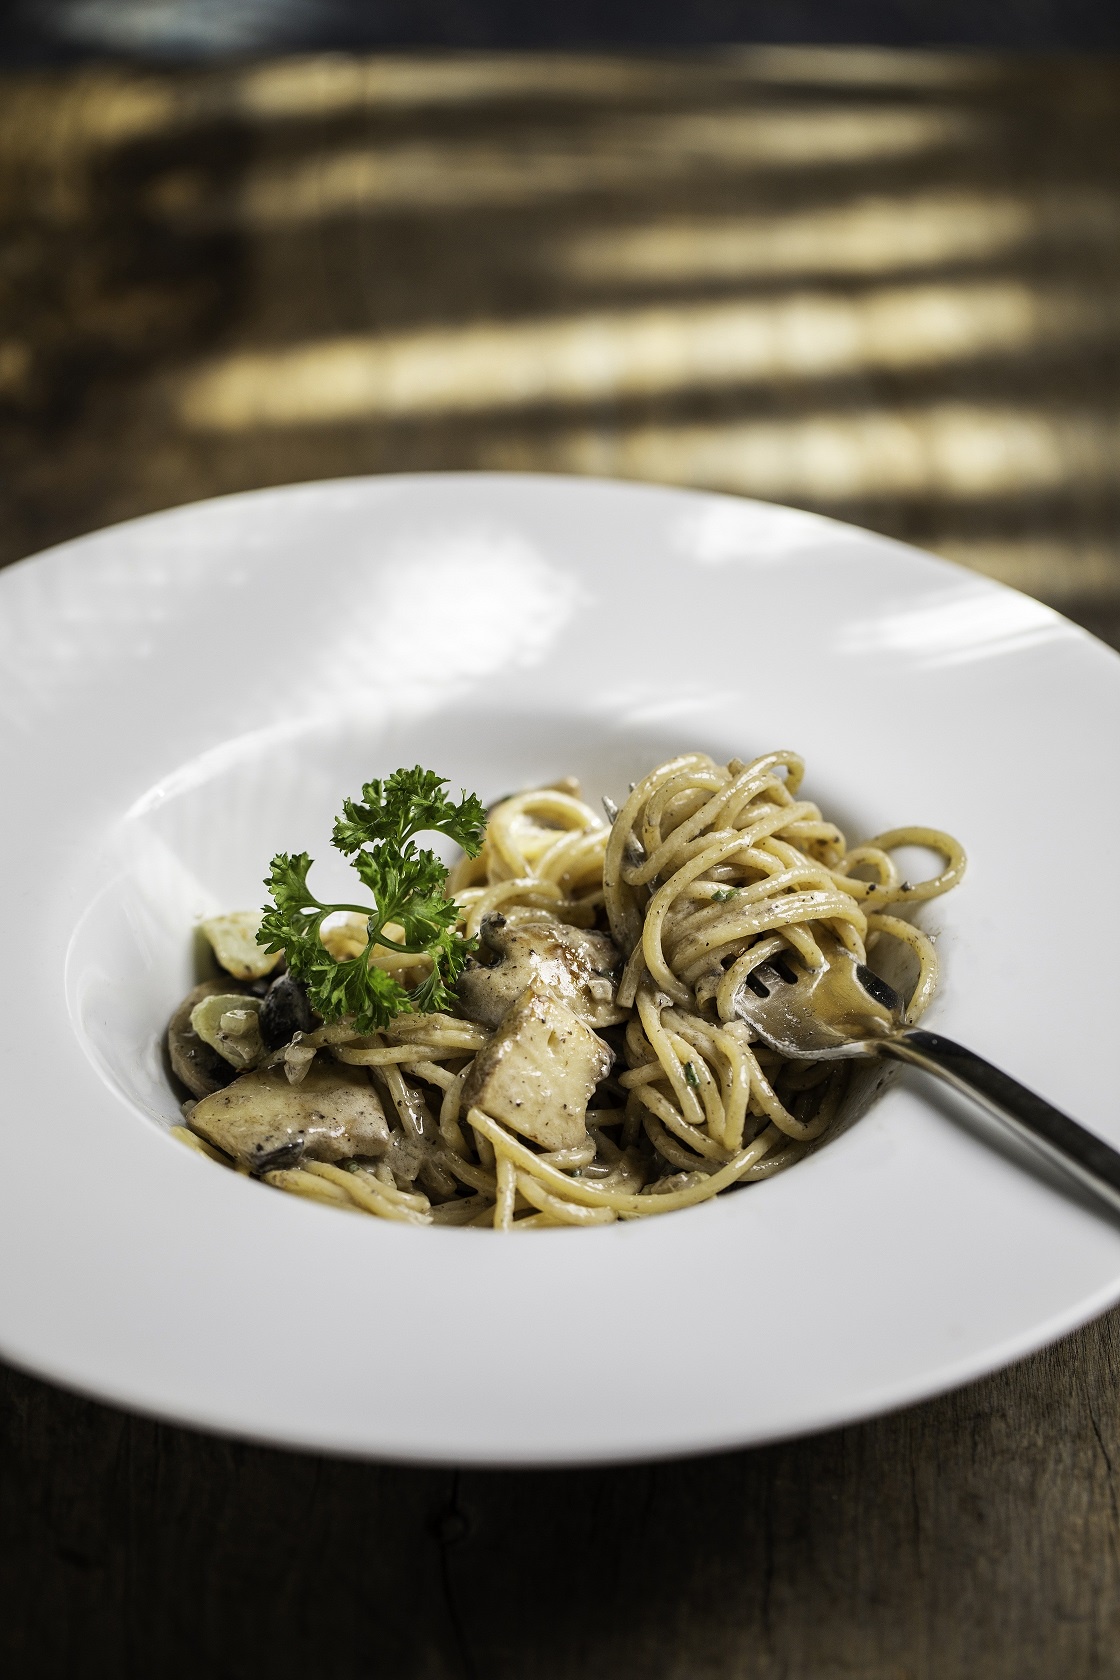 Special Dish for Truffle Lovers is Back Cafe Kantary is Ready to Serve Spaghetti Mushrooms and Truffle Cream